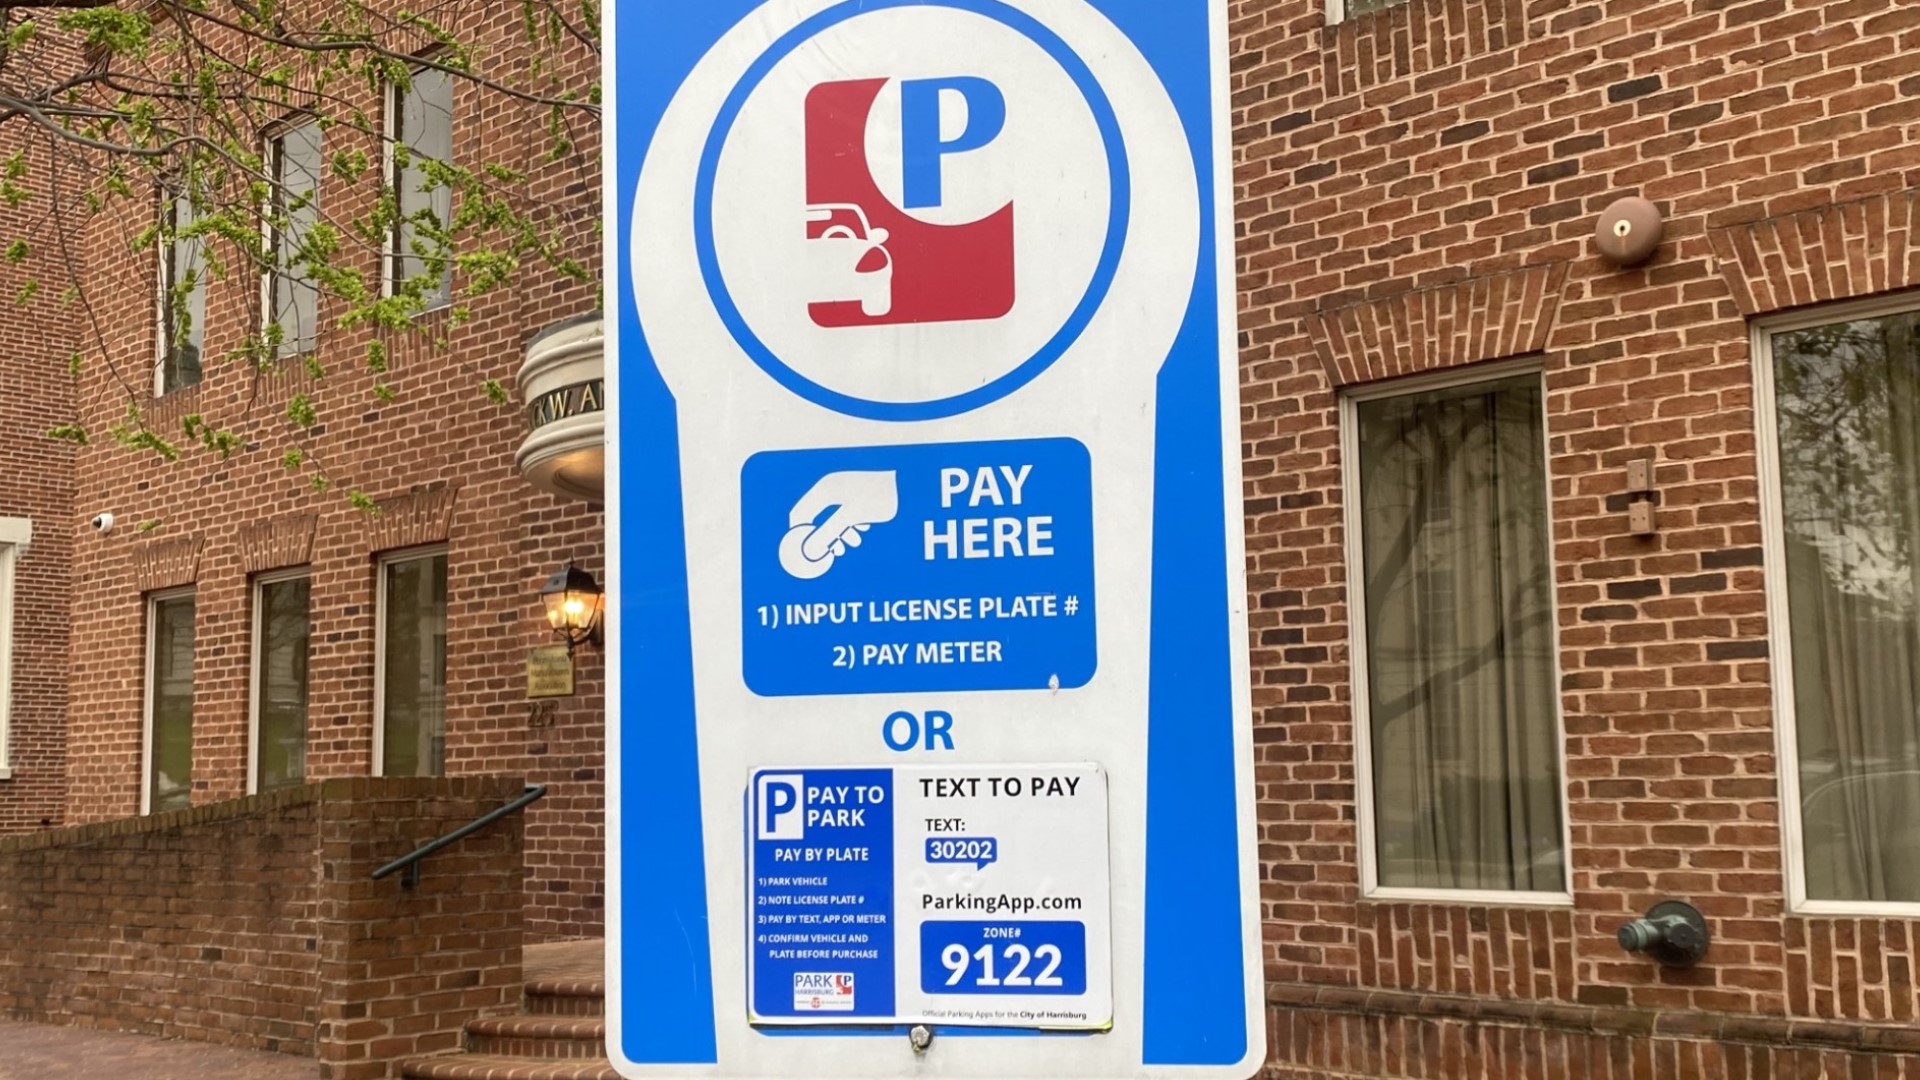 The City of Harrisburg has reportedly not received any direct revenue from its parking meters over the last several years, as parking has decreased in the city.